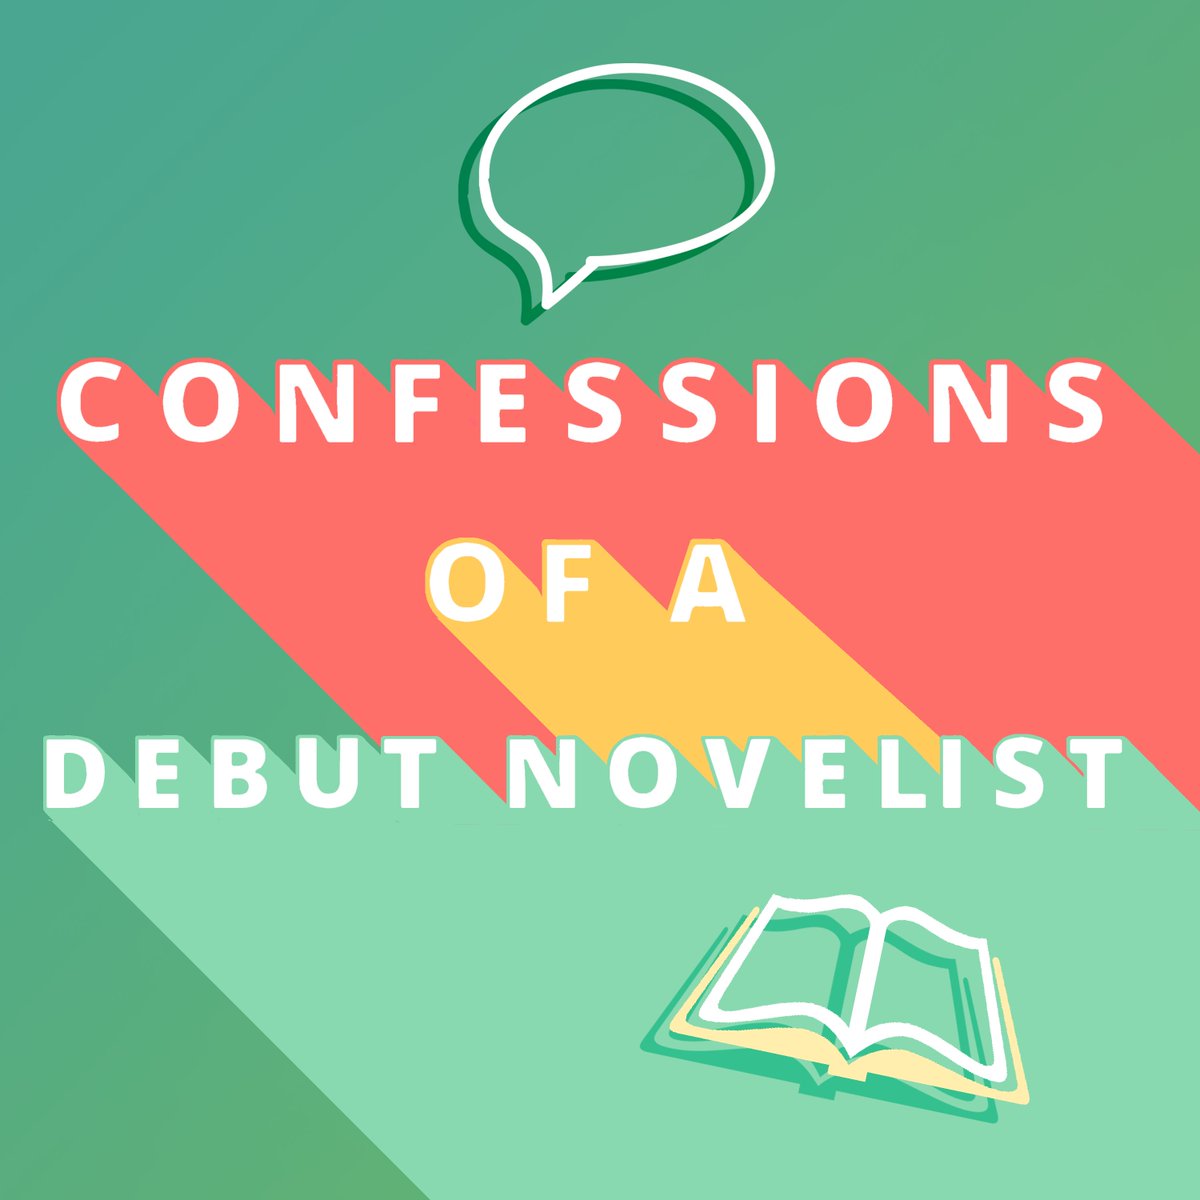 Today my podcast, Confessions of a Debut Novelist, has surpassed an amazing 10,000 downloads! Thank you so much for listening! If you'd like to support me and the authors featured, please consider buying from the affiliate podcast bookshop! uk.bookshop.org/shop/debutconf…